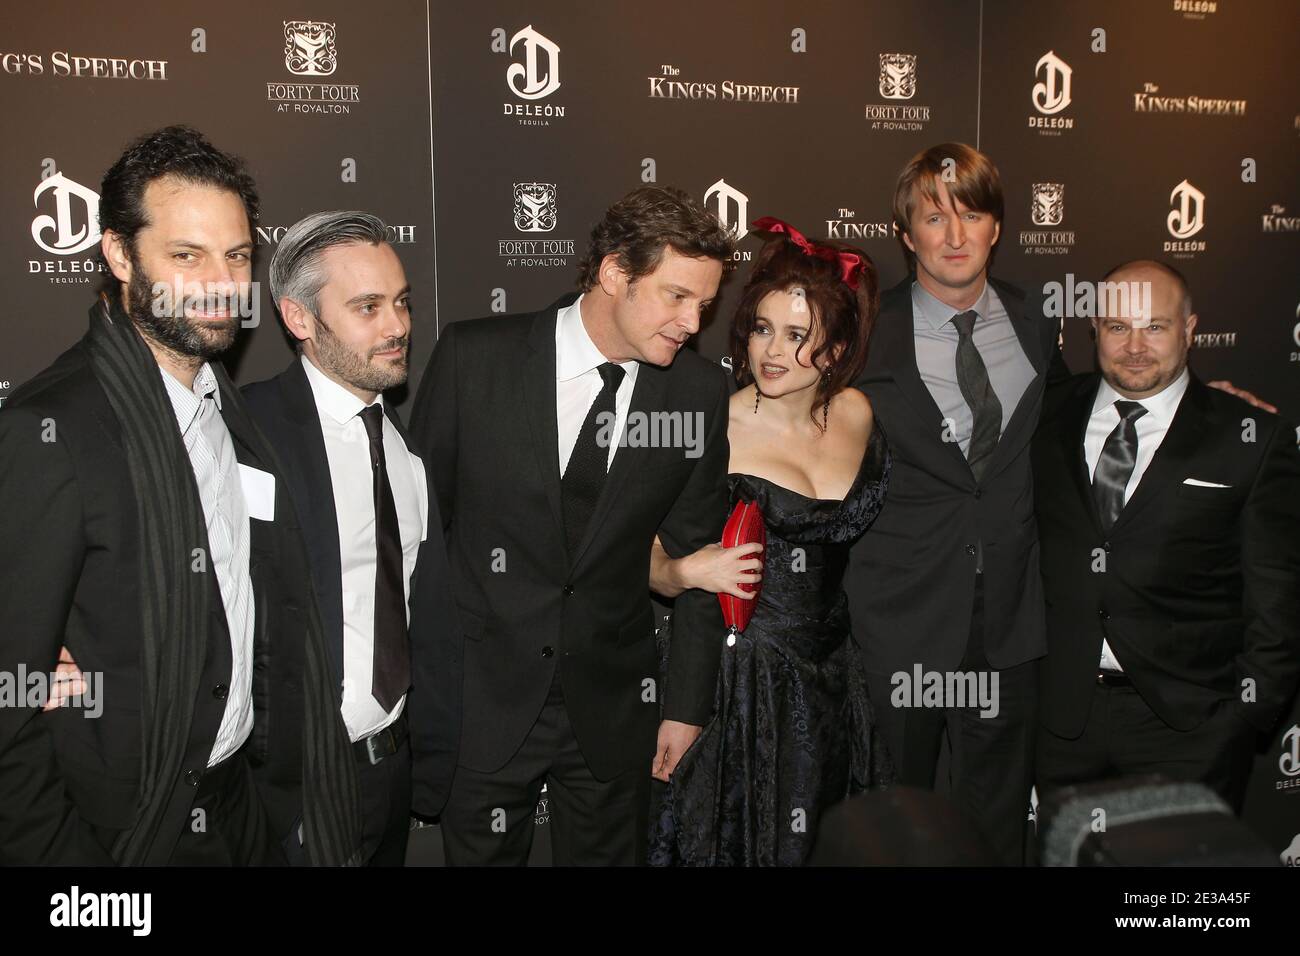 (L-R) Producer Emile Sherman, producer Iain Canning, actor Colin Firth, actress Helena Bonham Carter, director Tom Hooper and producer Gareth Unwin arriving for the premiere of 'The King's Speech' presented by The Weinstein Company, DeLeon, and AOL at Ziegfeld Theatre in New York City, NY, USA on November 8, 2010. Photo by Charles Guerin/ABACAPRESS.COM Stock Photo